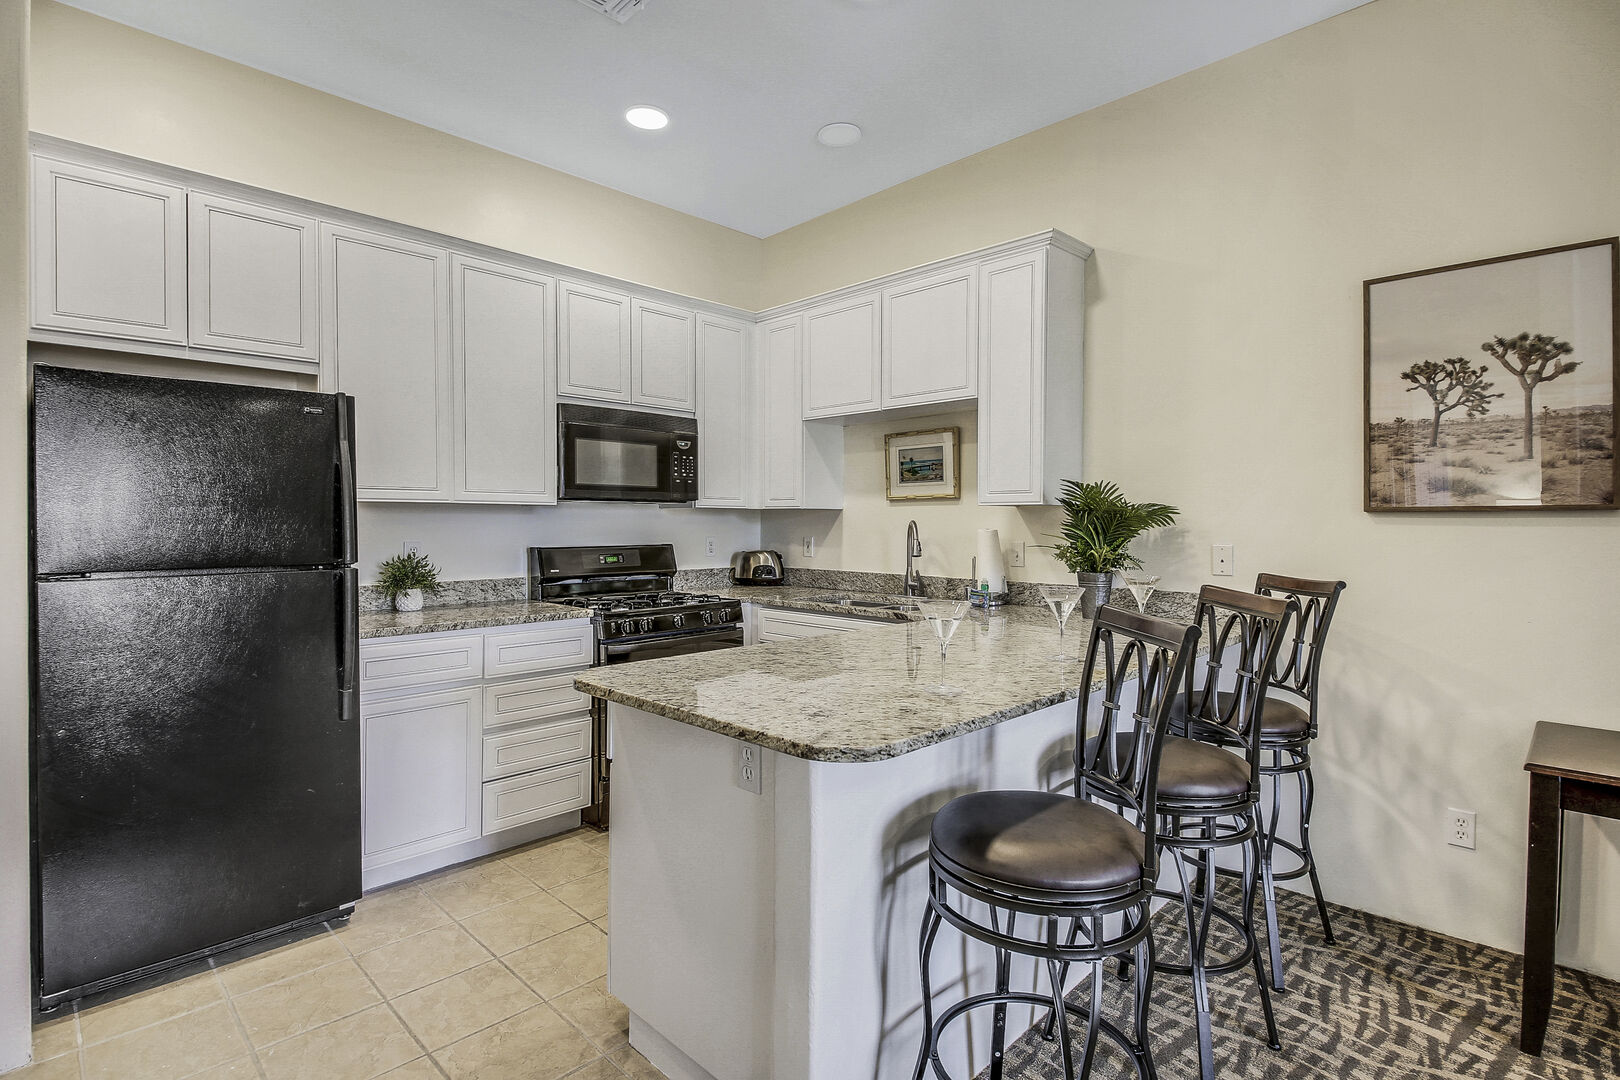 The fully-equipped kitchen features stunning appliances such as a Maytag top freezer refrigerator.